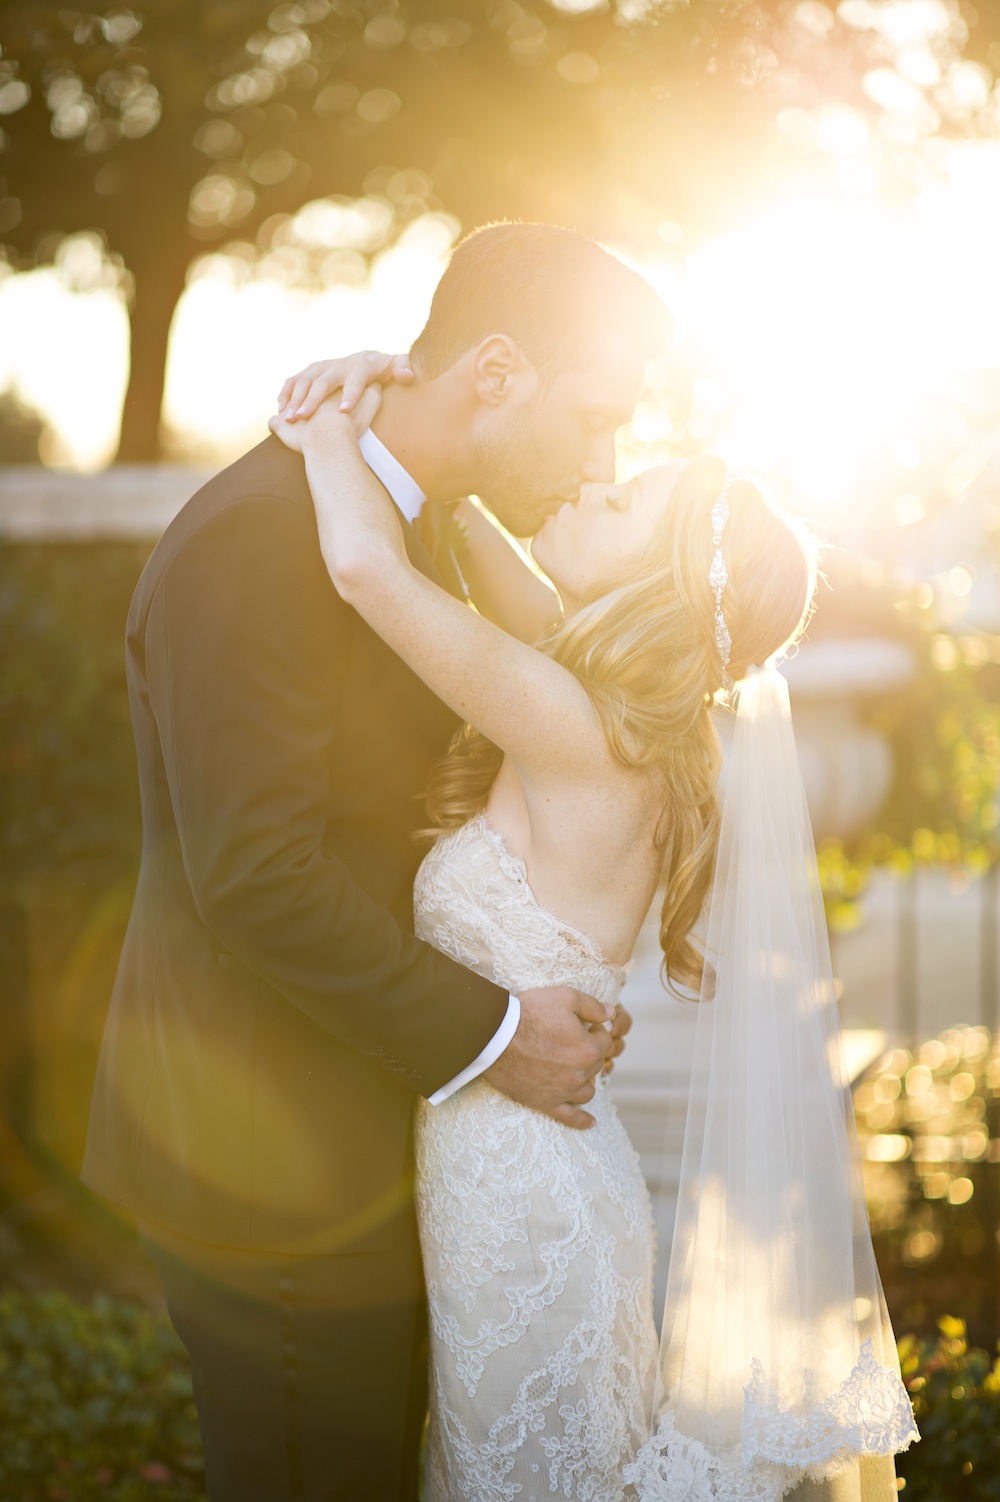 5 Things You Need To Know Before You Go Wedding Dress Shopping via TheELD.com